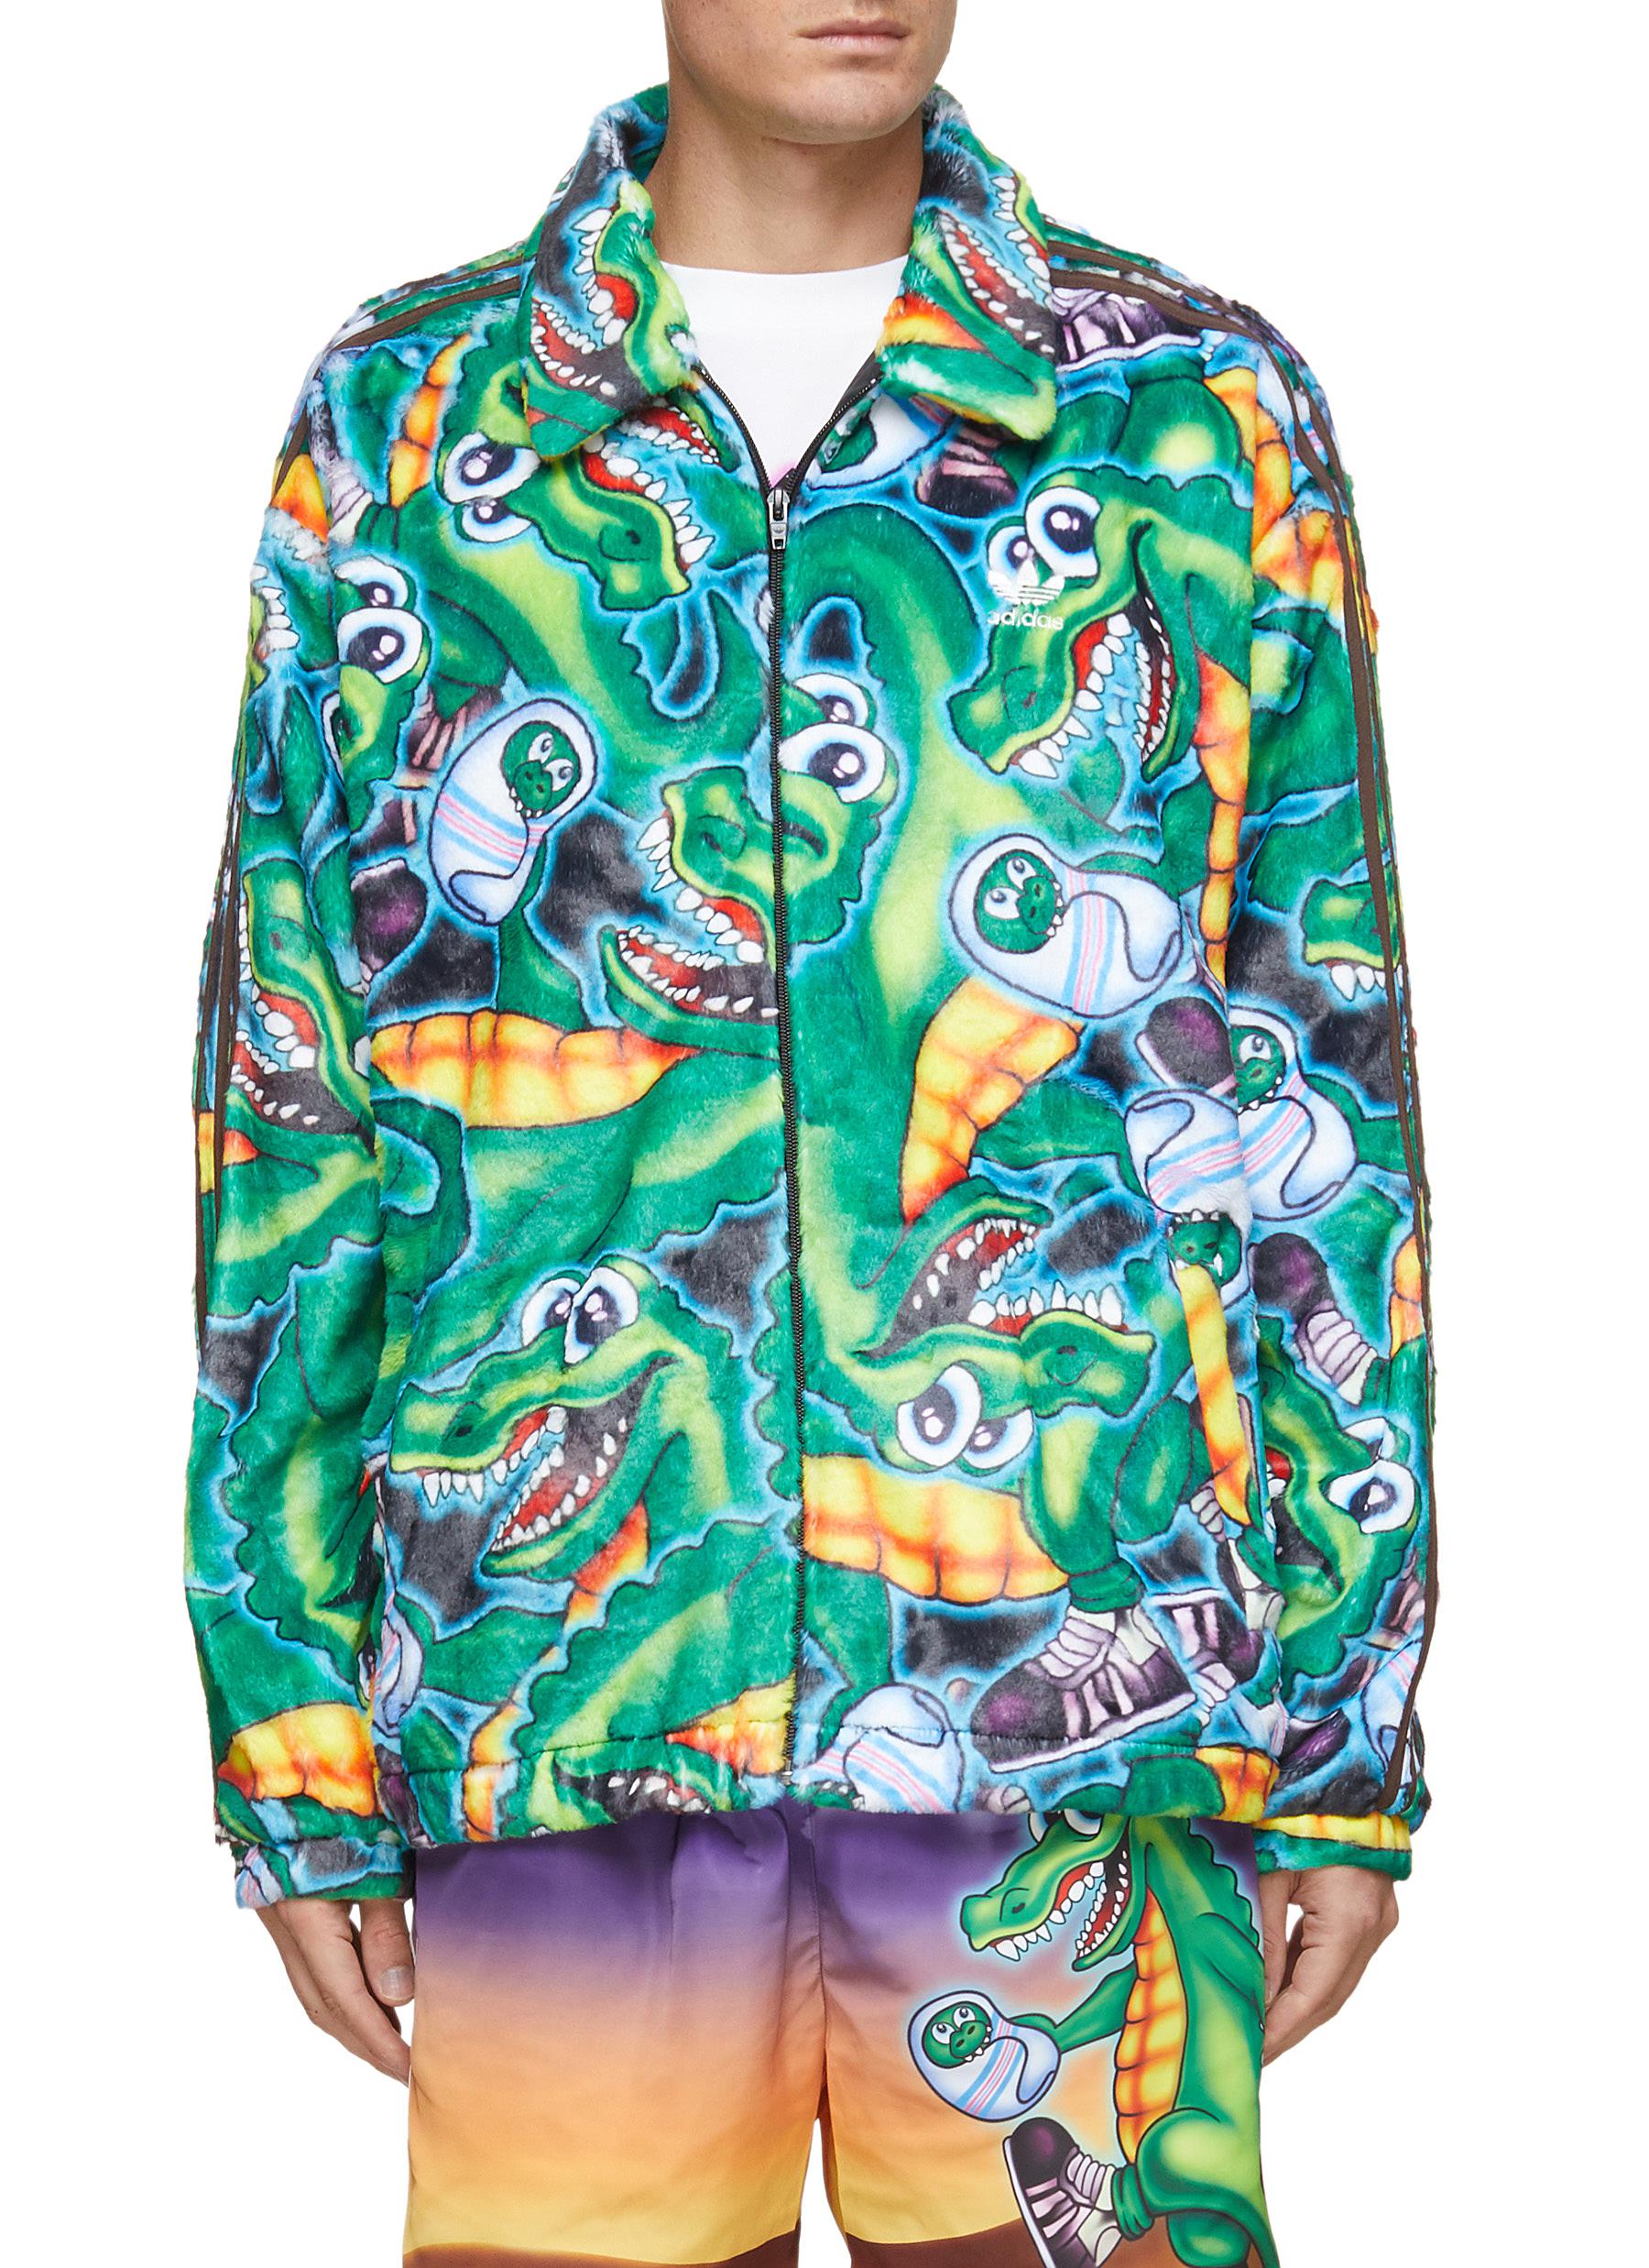 ADIDAS X KERWIN FROST All-over Alligator Graphic Print Zip-up Jacket